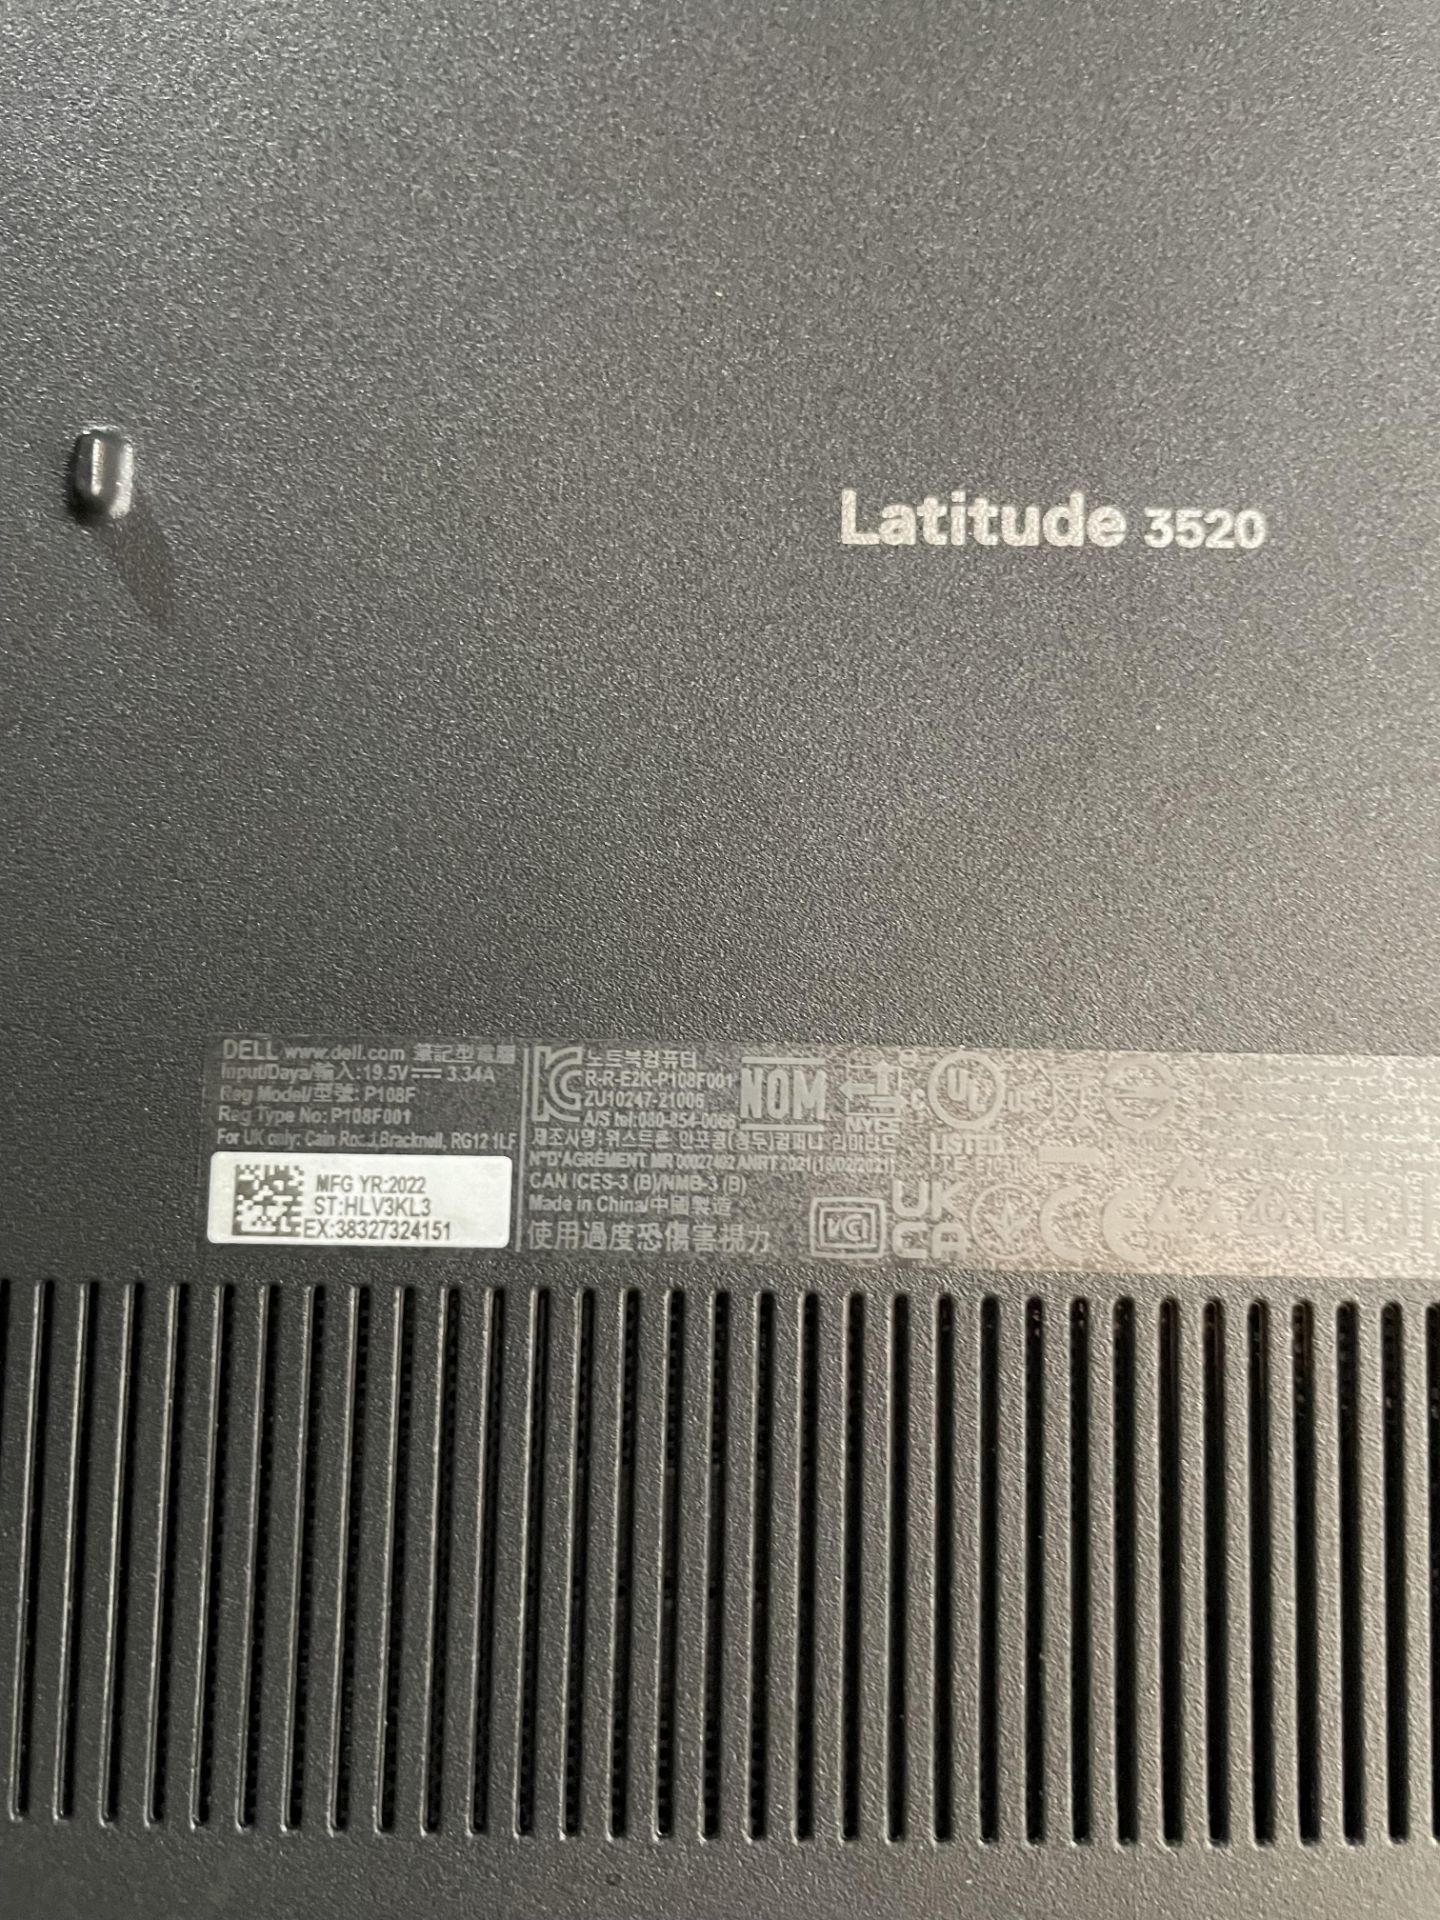 Dell Latitude 3520 Core i5 Laptop (Hard Drive Wiped) Please read the following important - Image 2 of 2